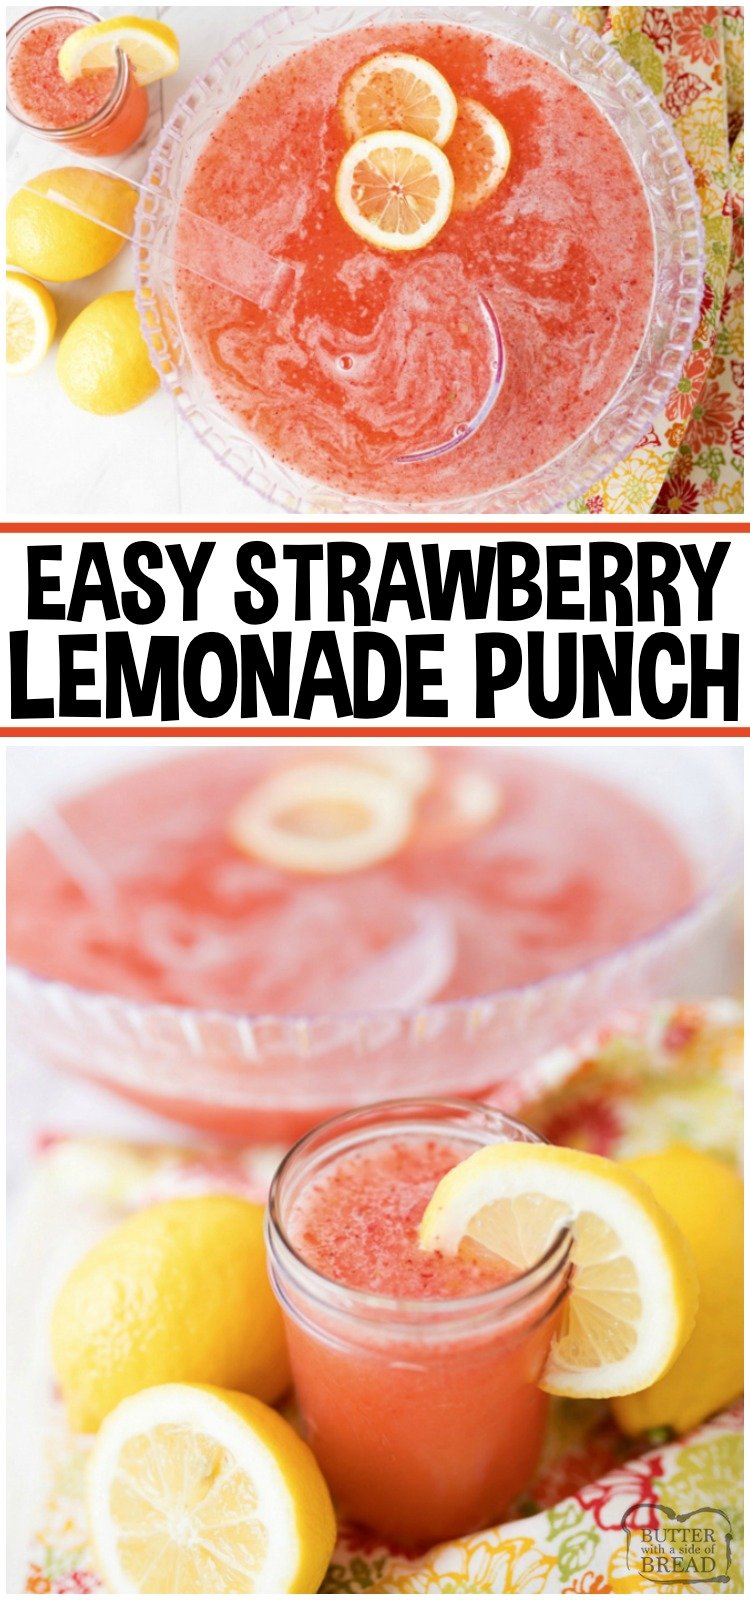 Strawberry Lemonade Punch is a simple & delicious 3 ingredient party drink! This Strawberry Lemonade recipe is refreshing and a breeze to whip together. Lemon-Lime Soda, powdered lemonade mix and frozen strawberries is all you need to make this sparkling party punch. #punch #lemonade #strawberry #party #beverage #mocktail #recipe from BUTTER WITH A SIDE OF BREAD